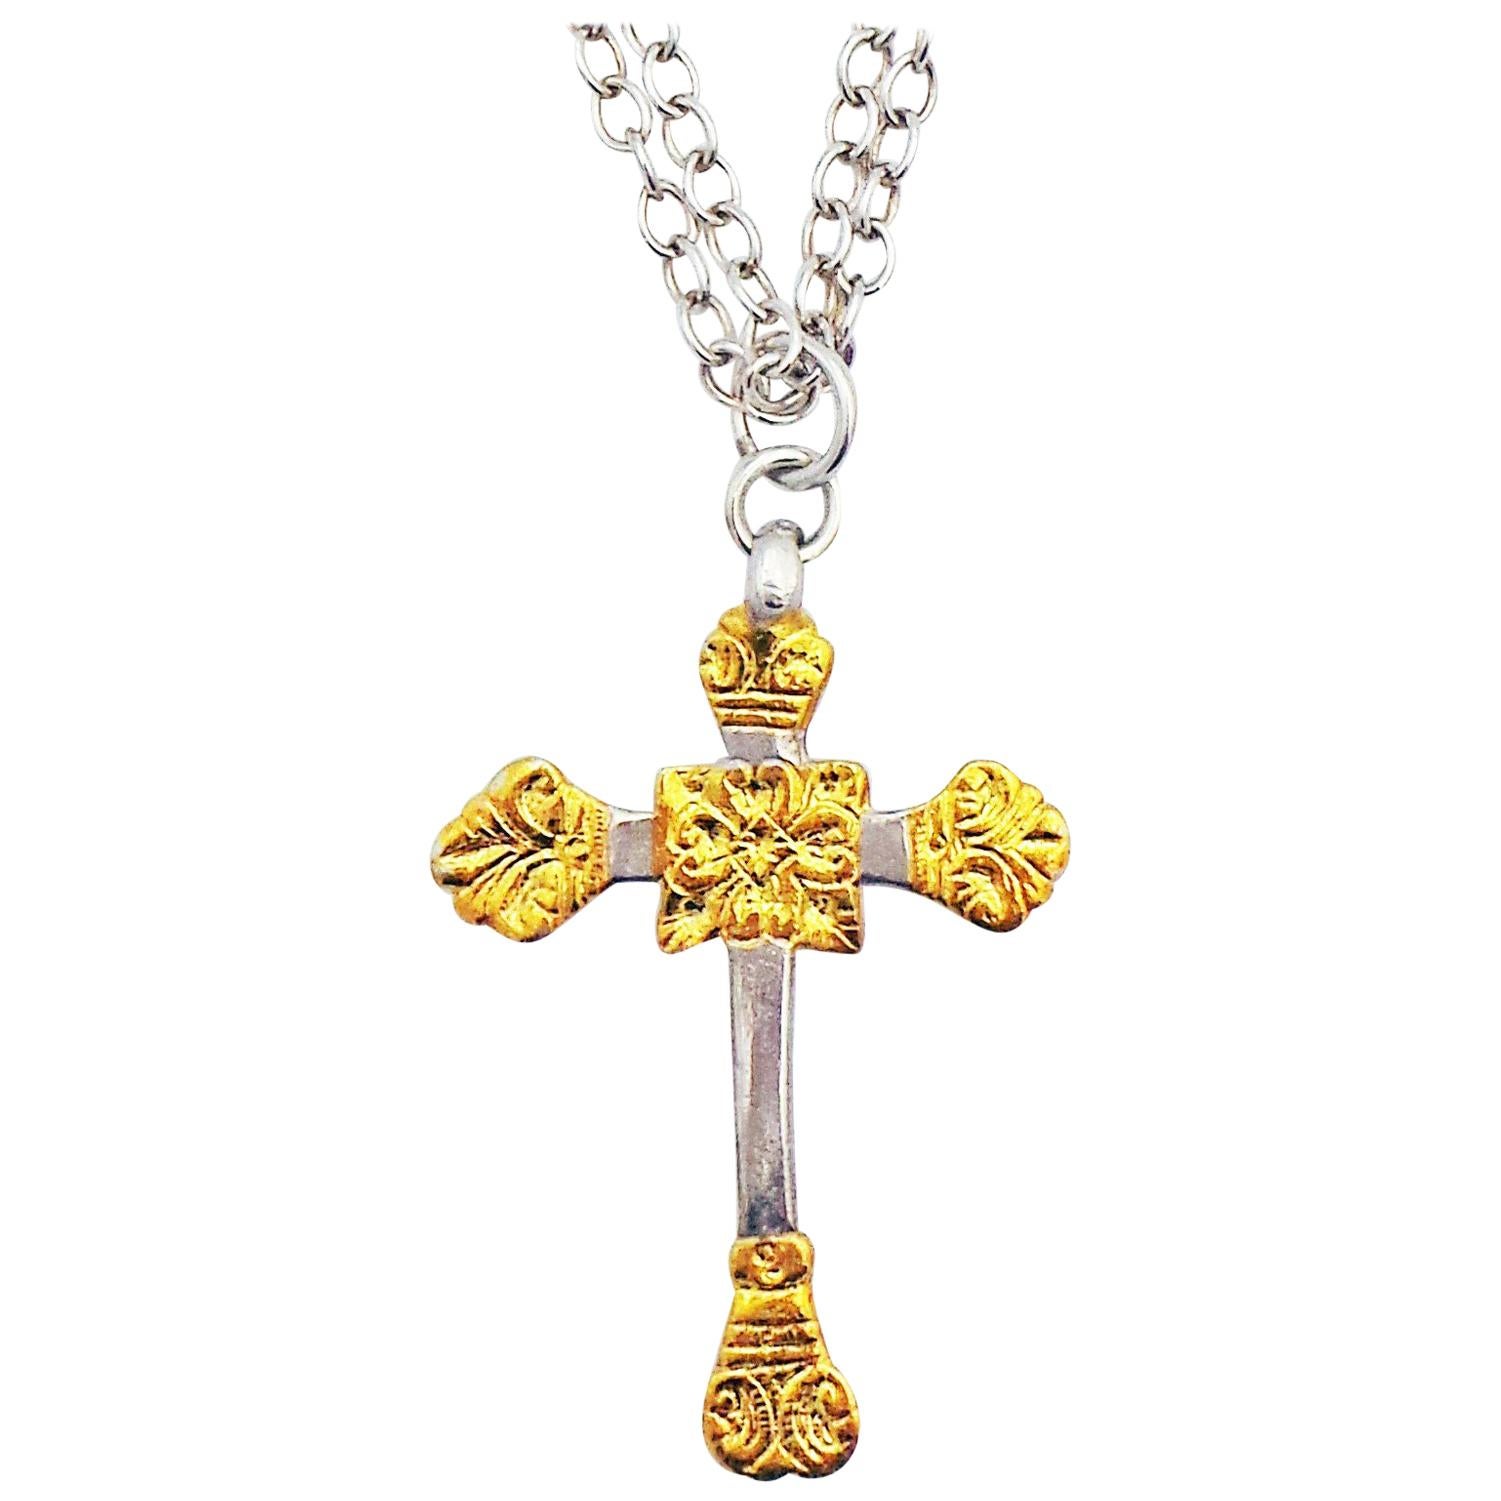 Keum-Boo 24 Karat Gold and Sterling Silver Cross Pendant Chain Necklace